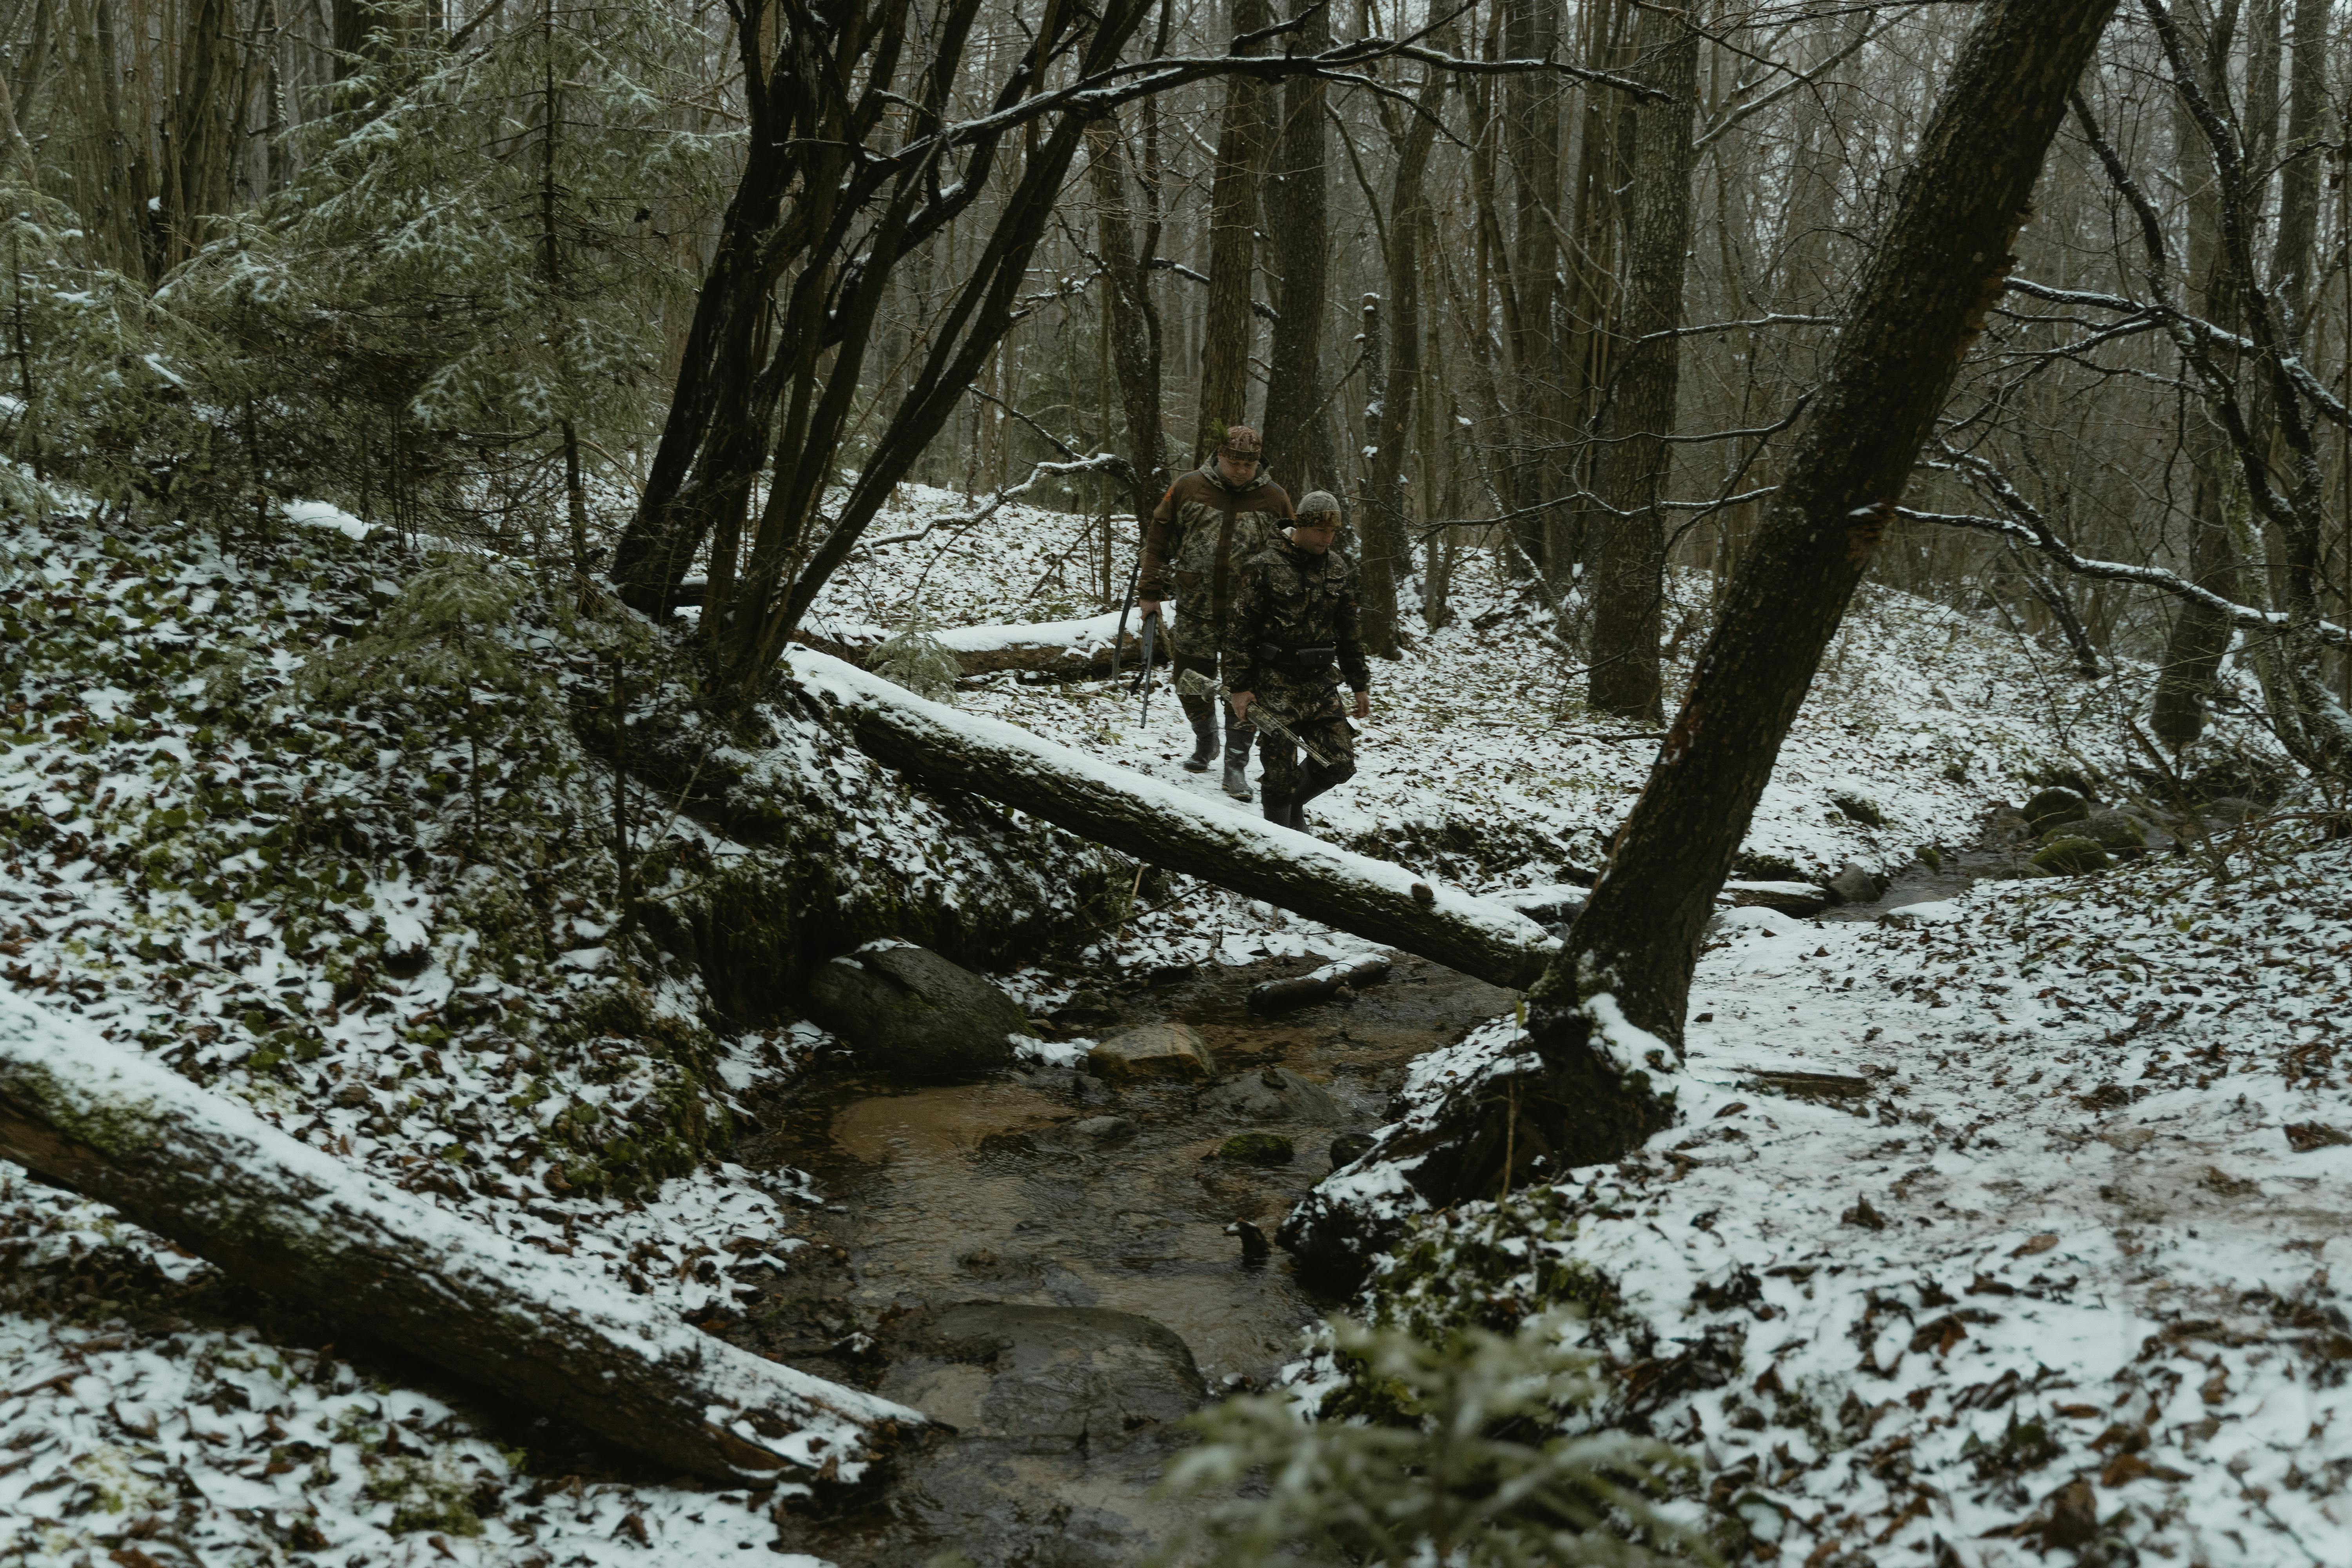 two men walking in the woods holding rifles